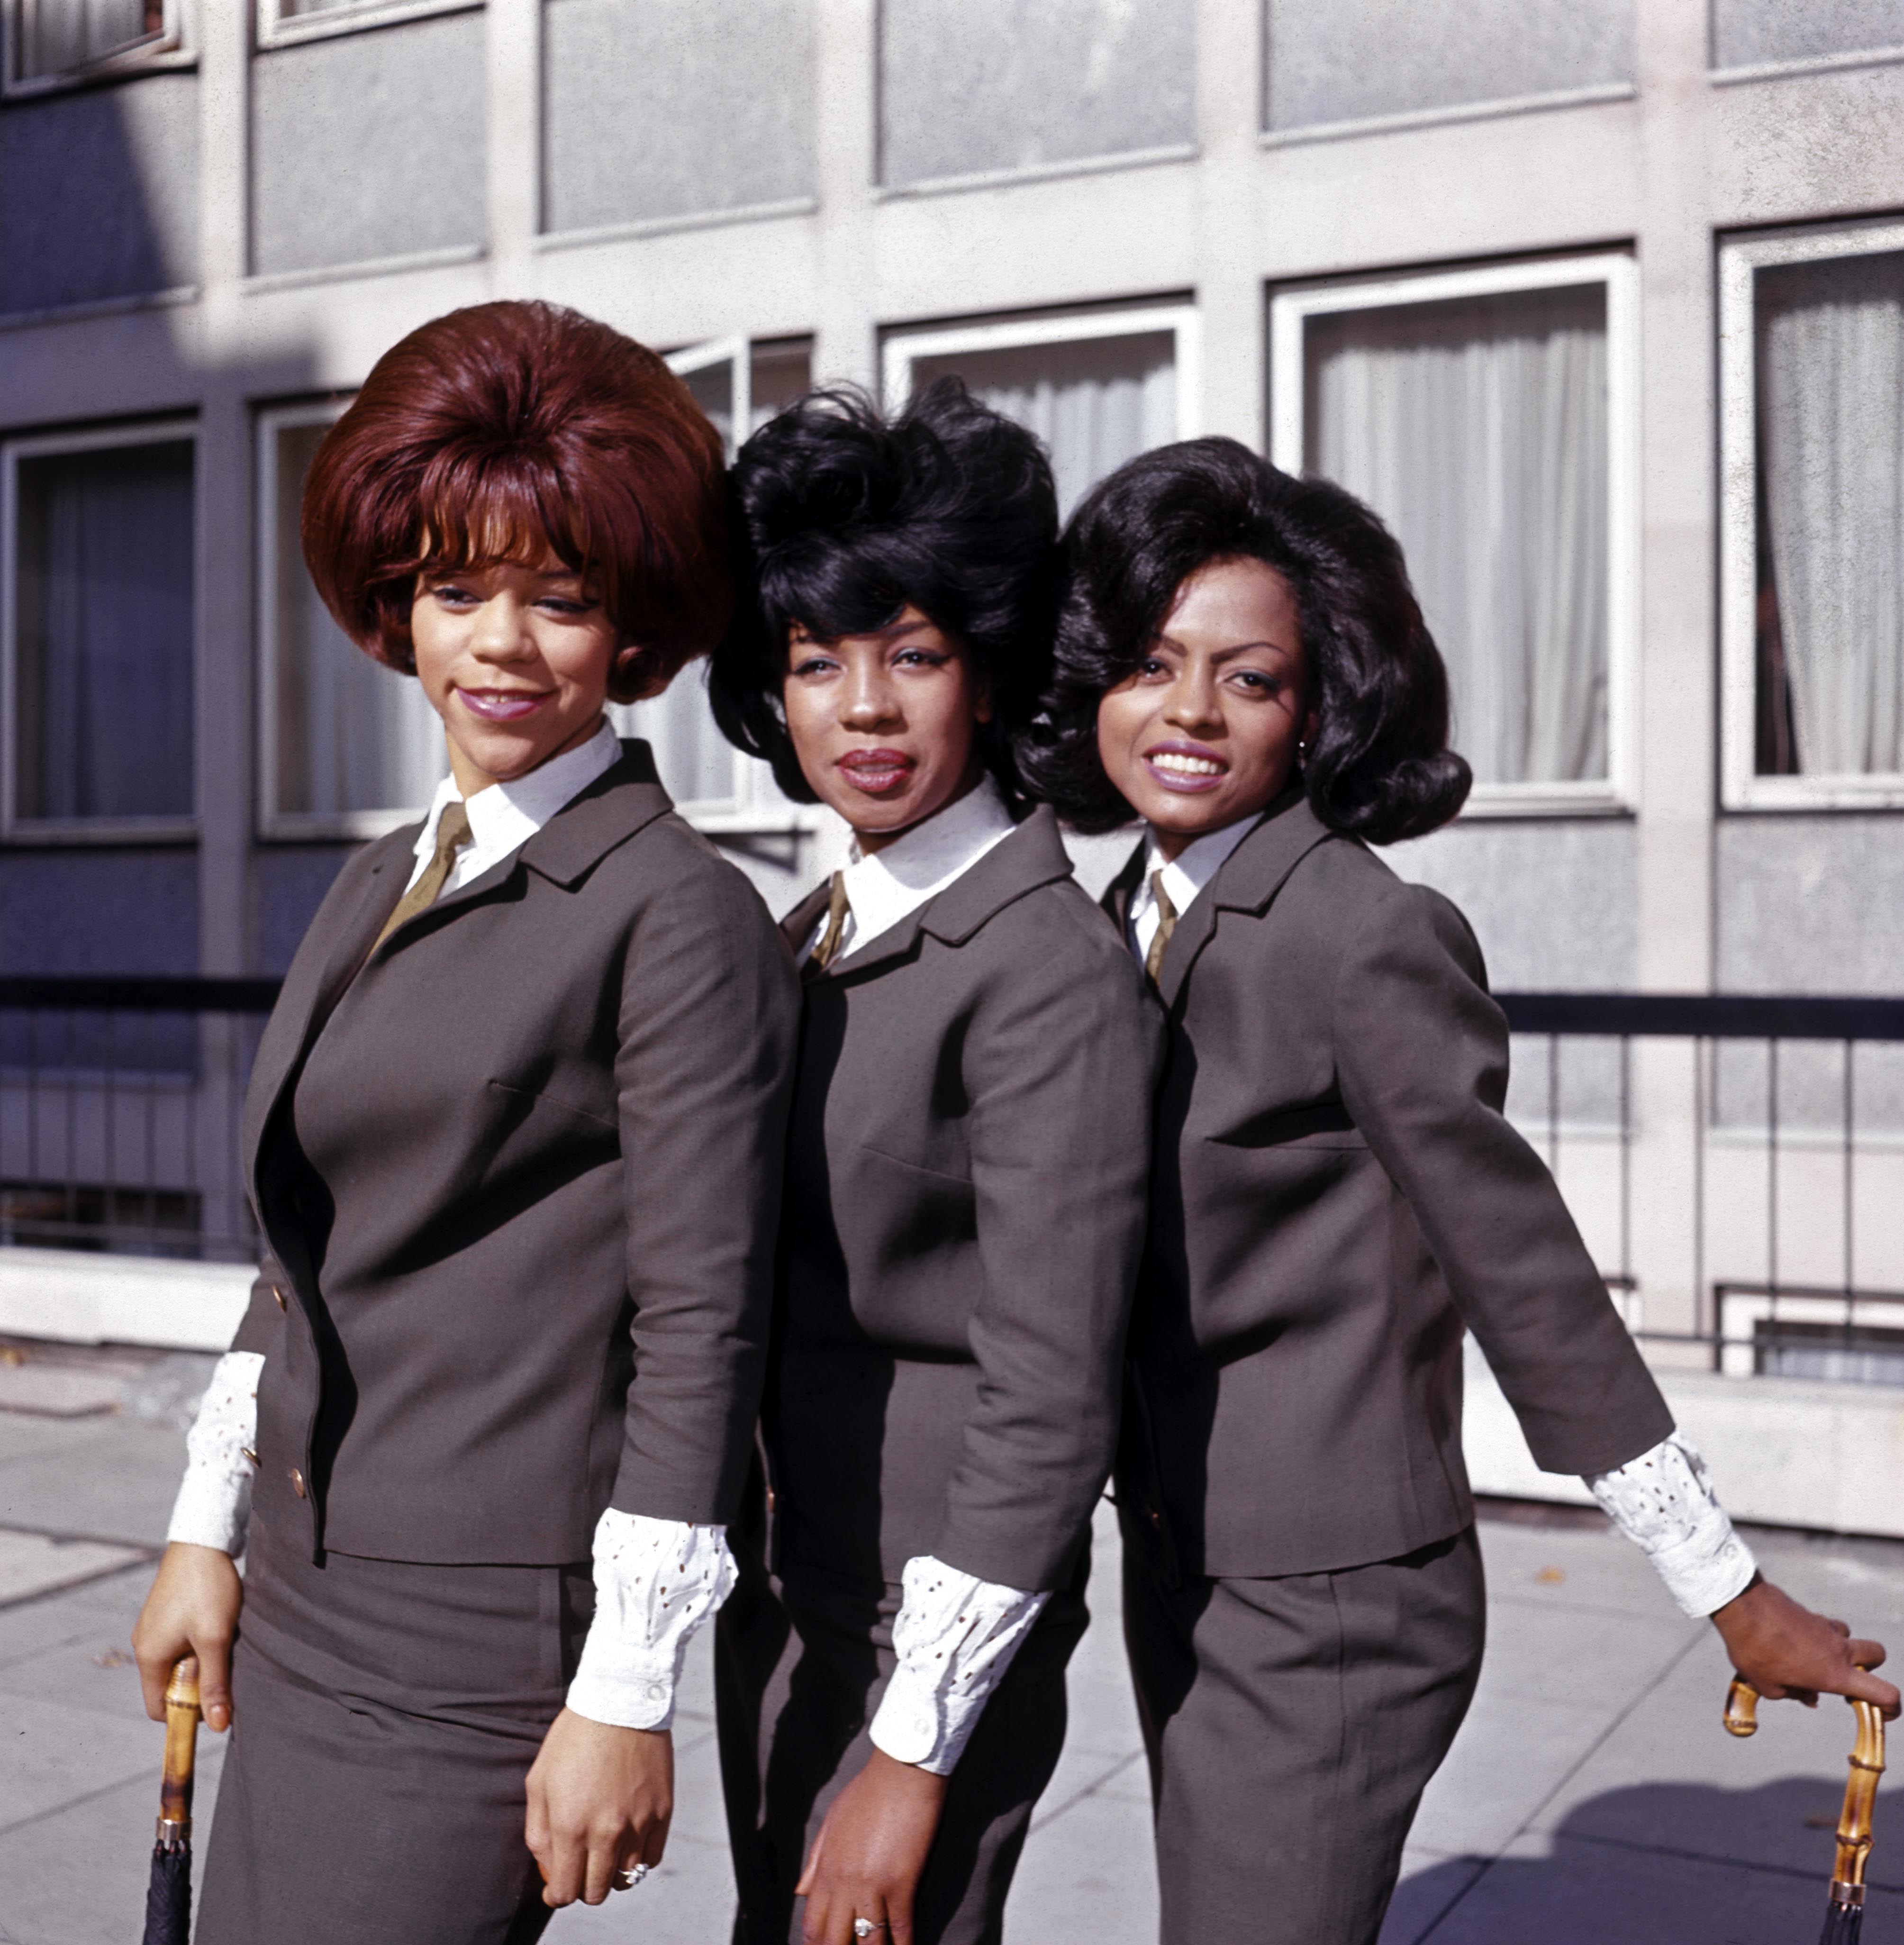 The Supremes: (L-R): Florence Ballard, Mary Wilson and Diana Ross wearing matching outfits and posing for the camera.